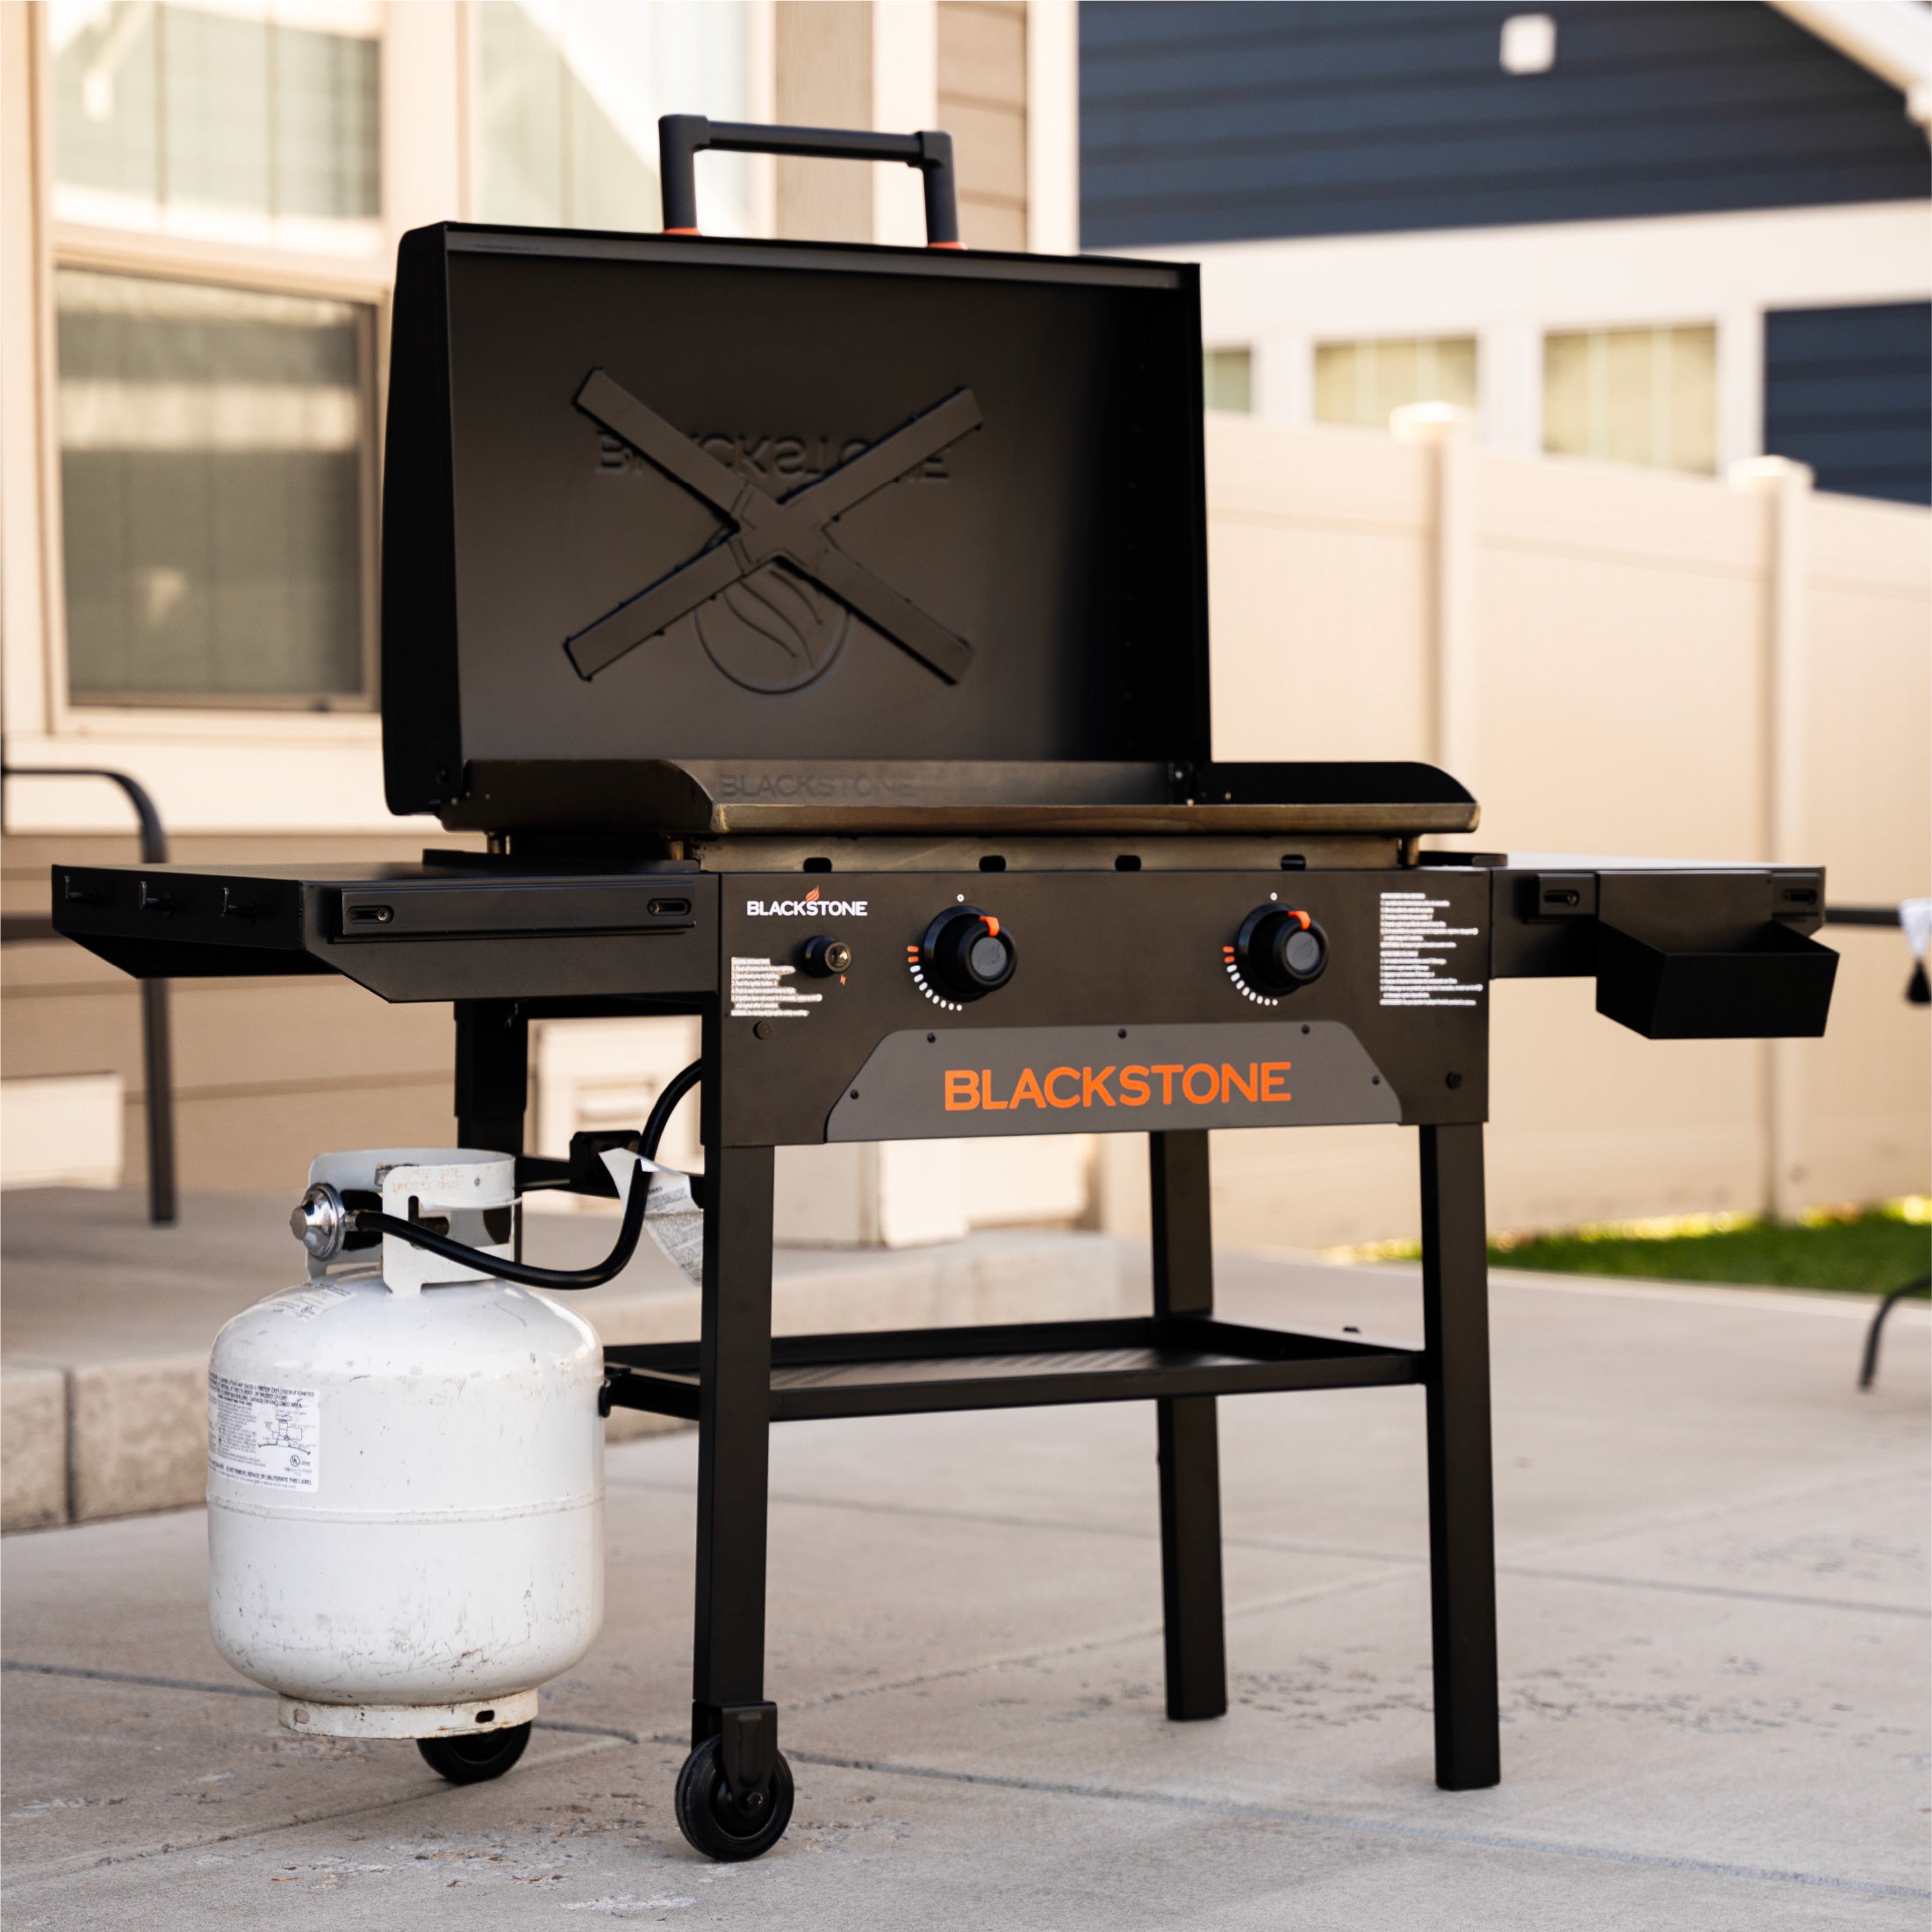 Blackstone 28" Griddle with Hood Lifestyle Pictures